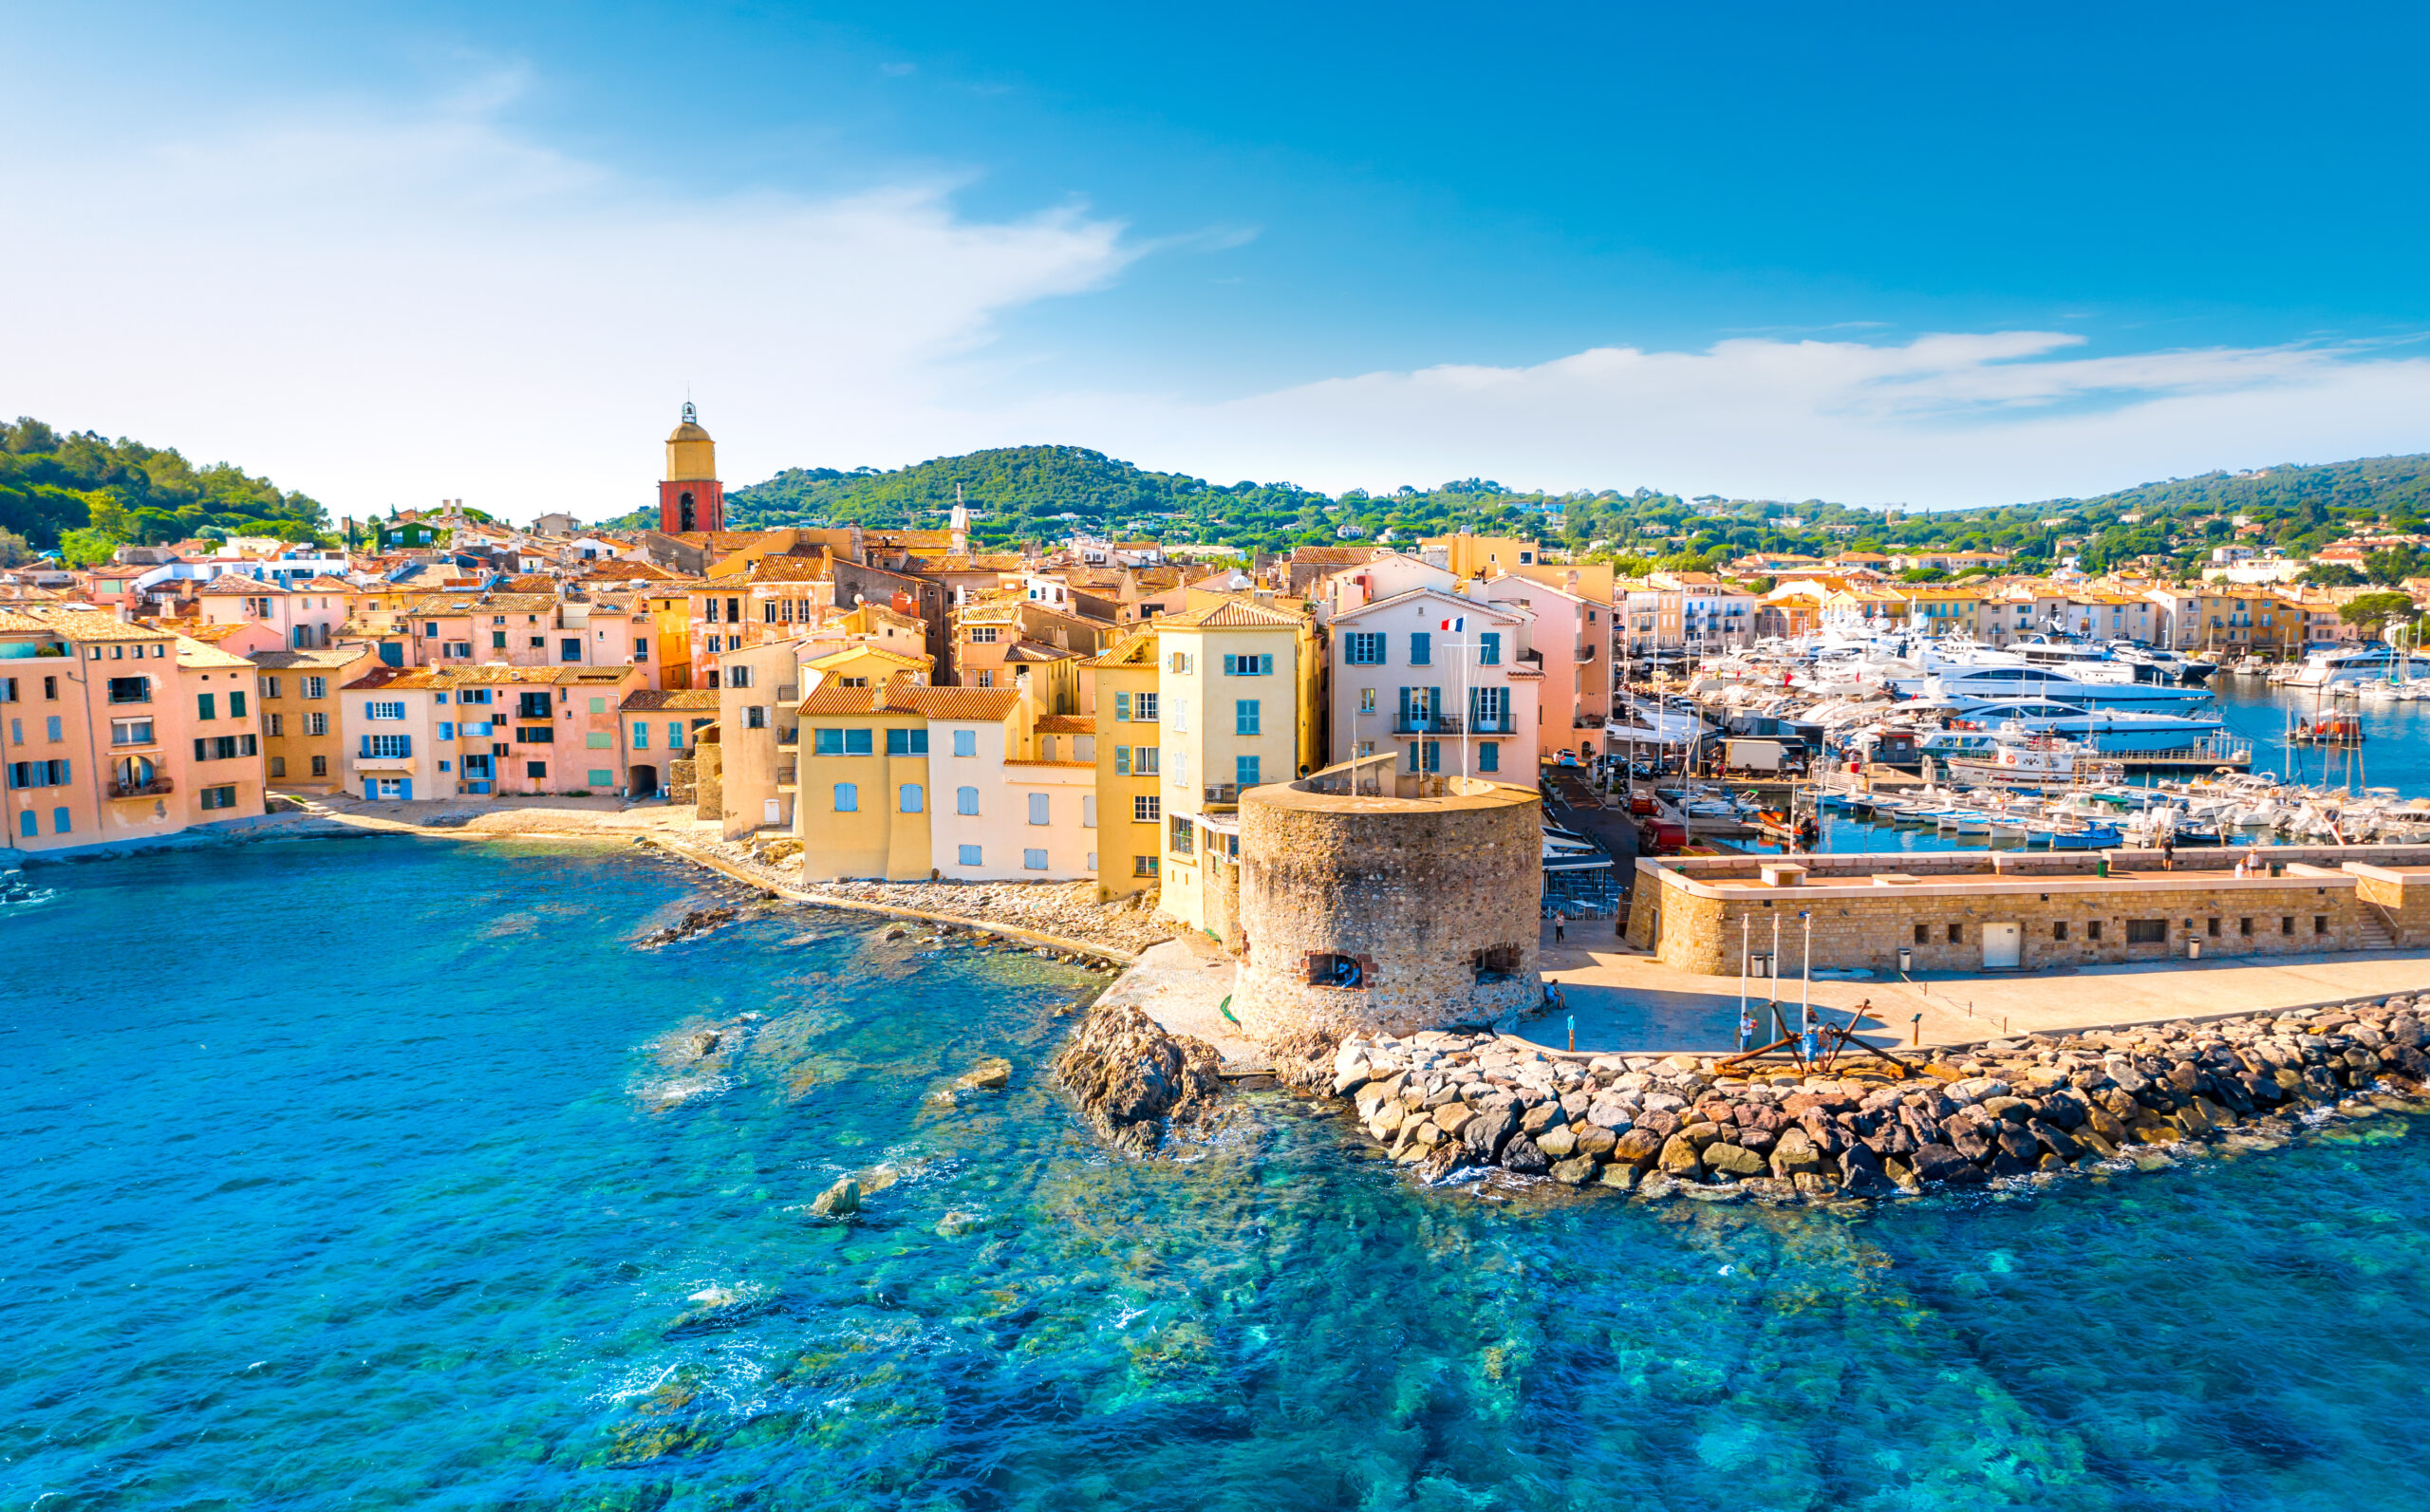 Best things to do in Saint-Tropez France